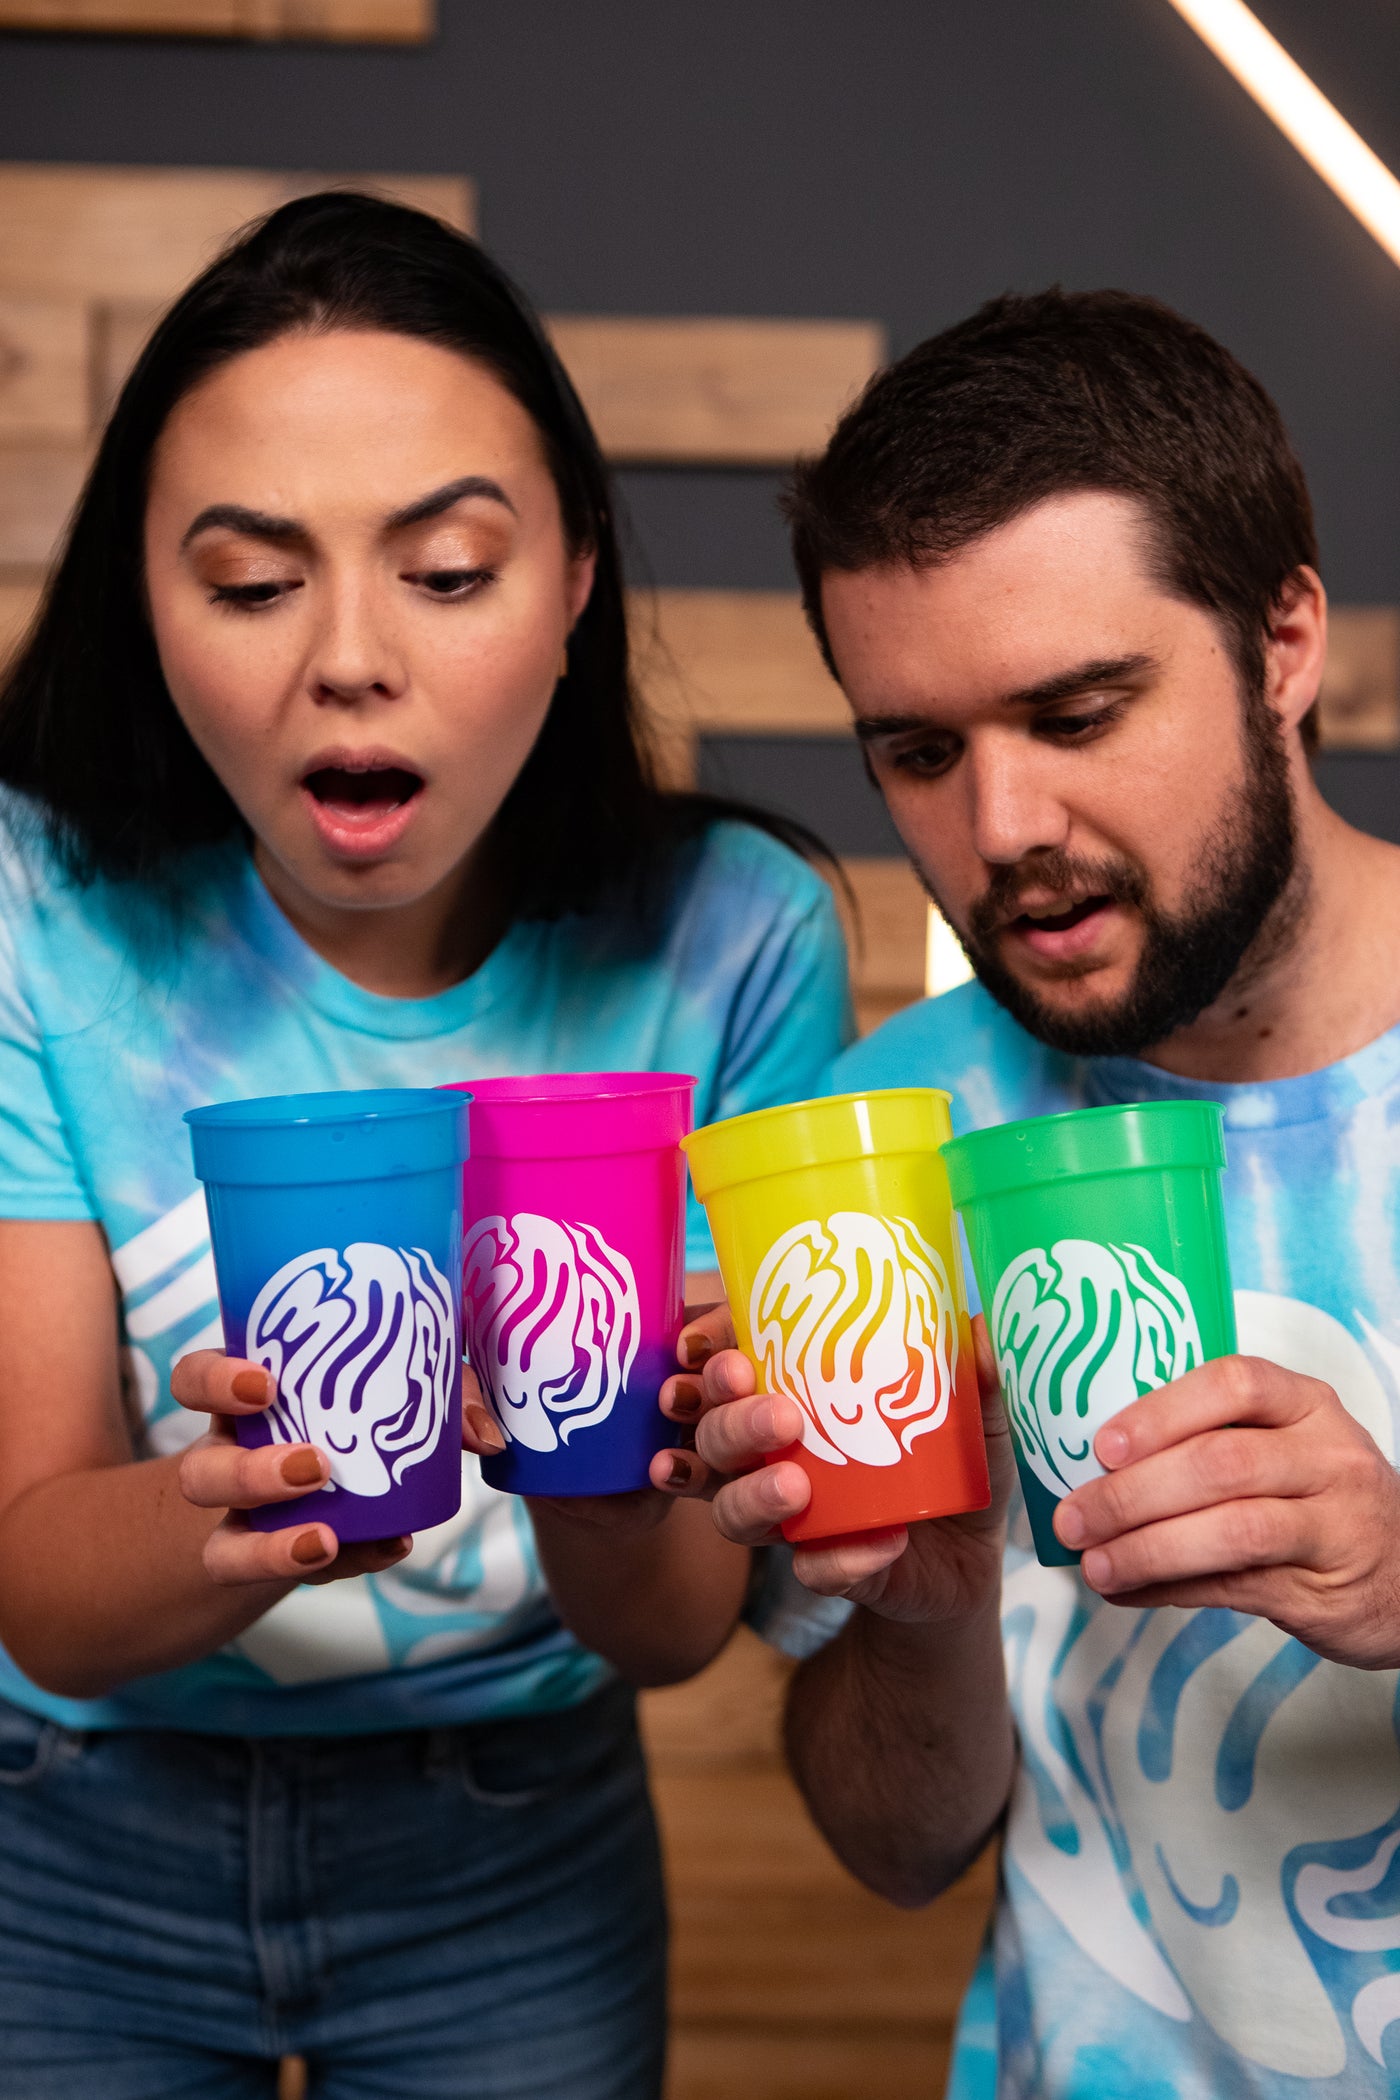 Color Changing Trippy Smile Cups - 4 Pack